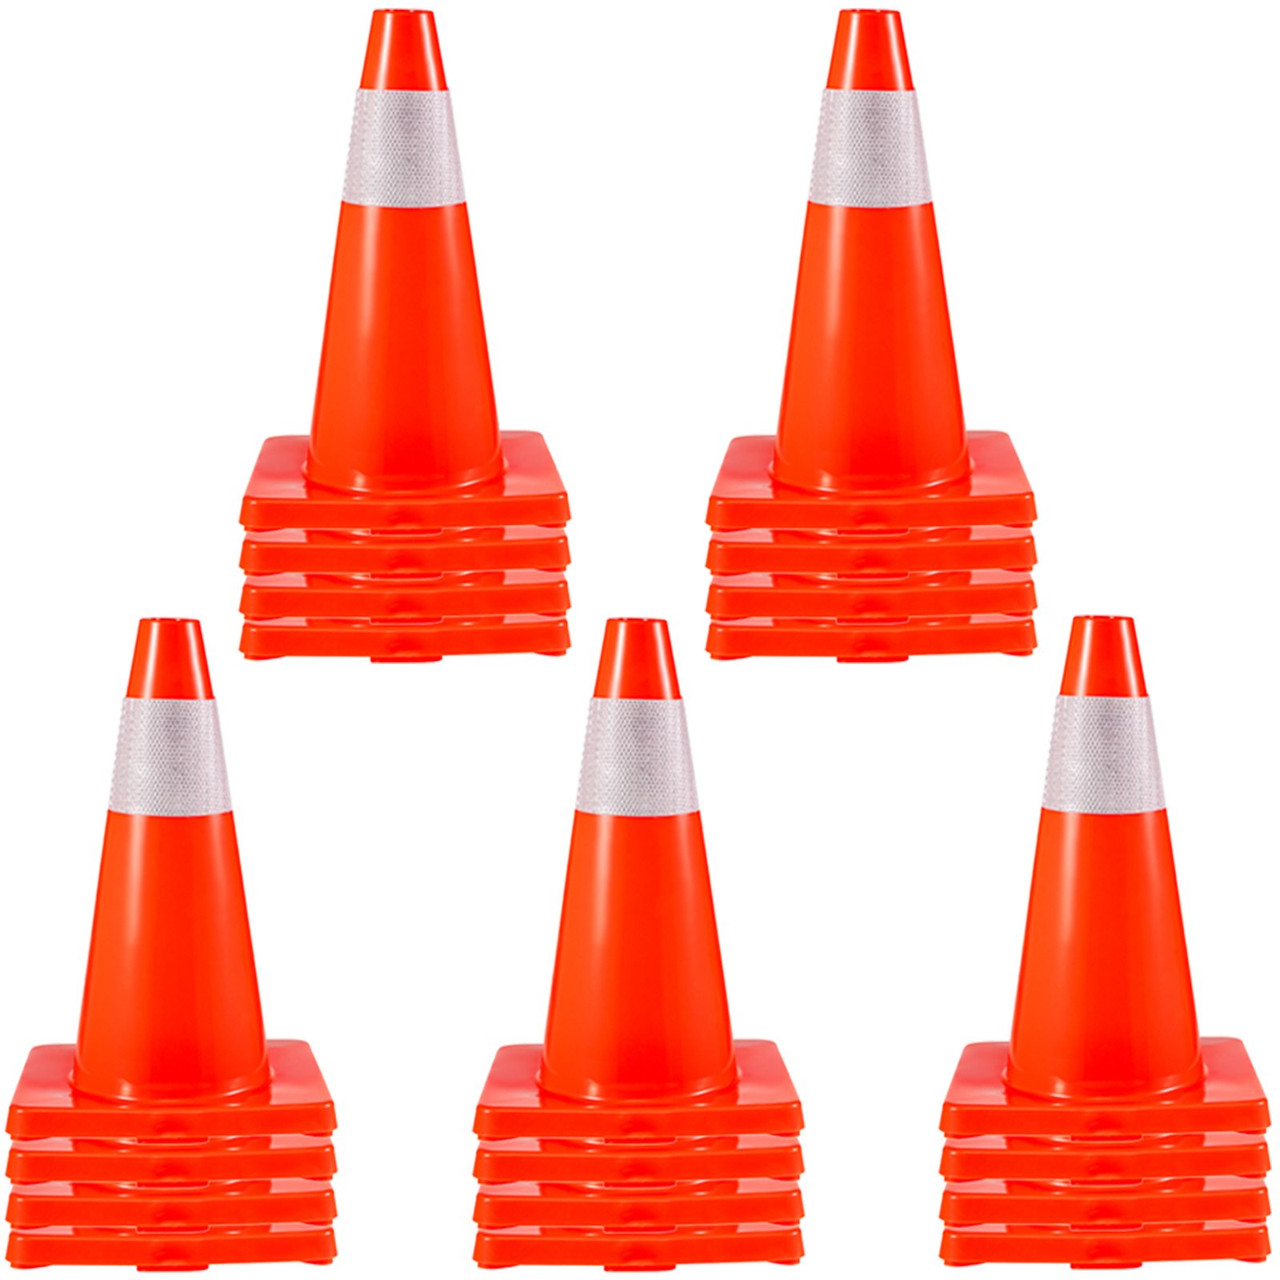 20Pack 18" Traffic Cones, Safety Road Parking Cones PVC Base, Orange Traffic Cone with Reflective Collars, Hazard Construction Cones for Home Traffic Parking